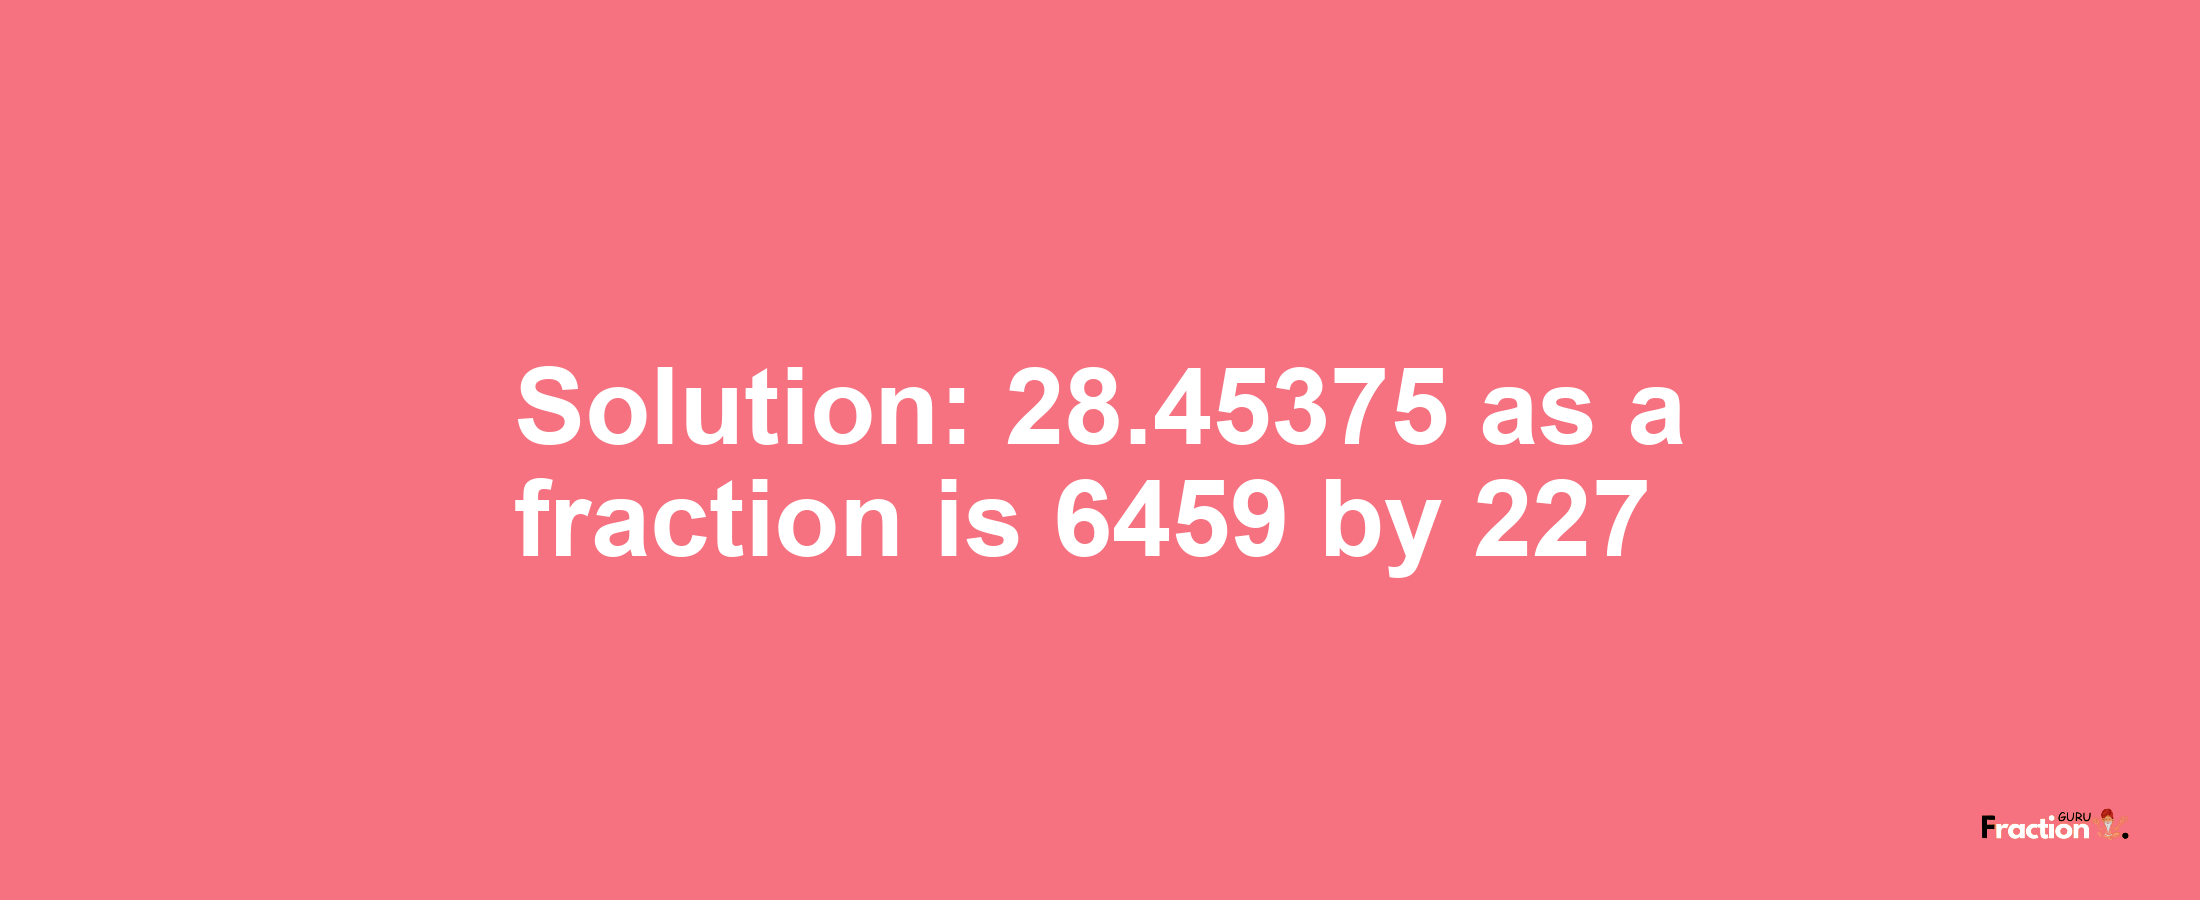 Solution:28.45375 as a fraction is 6459/227